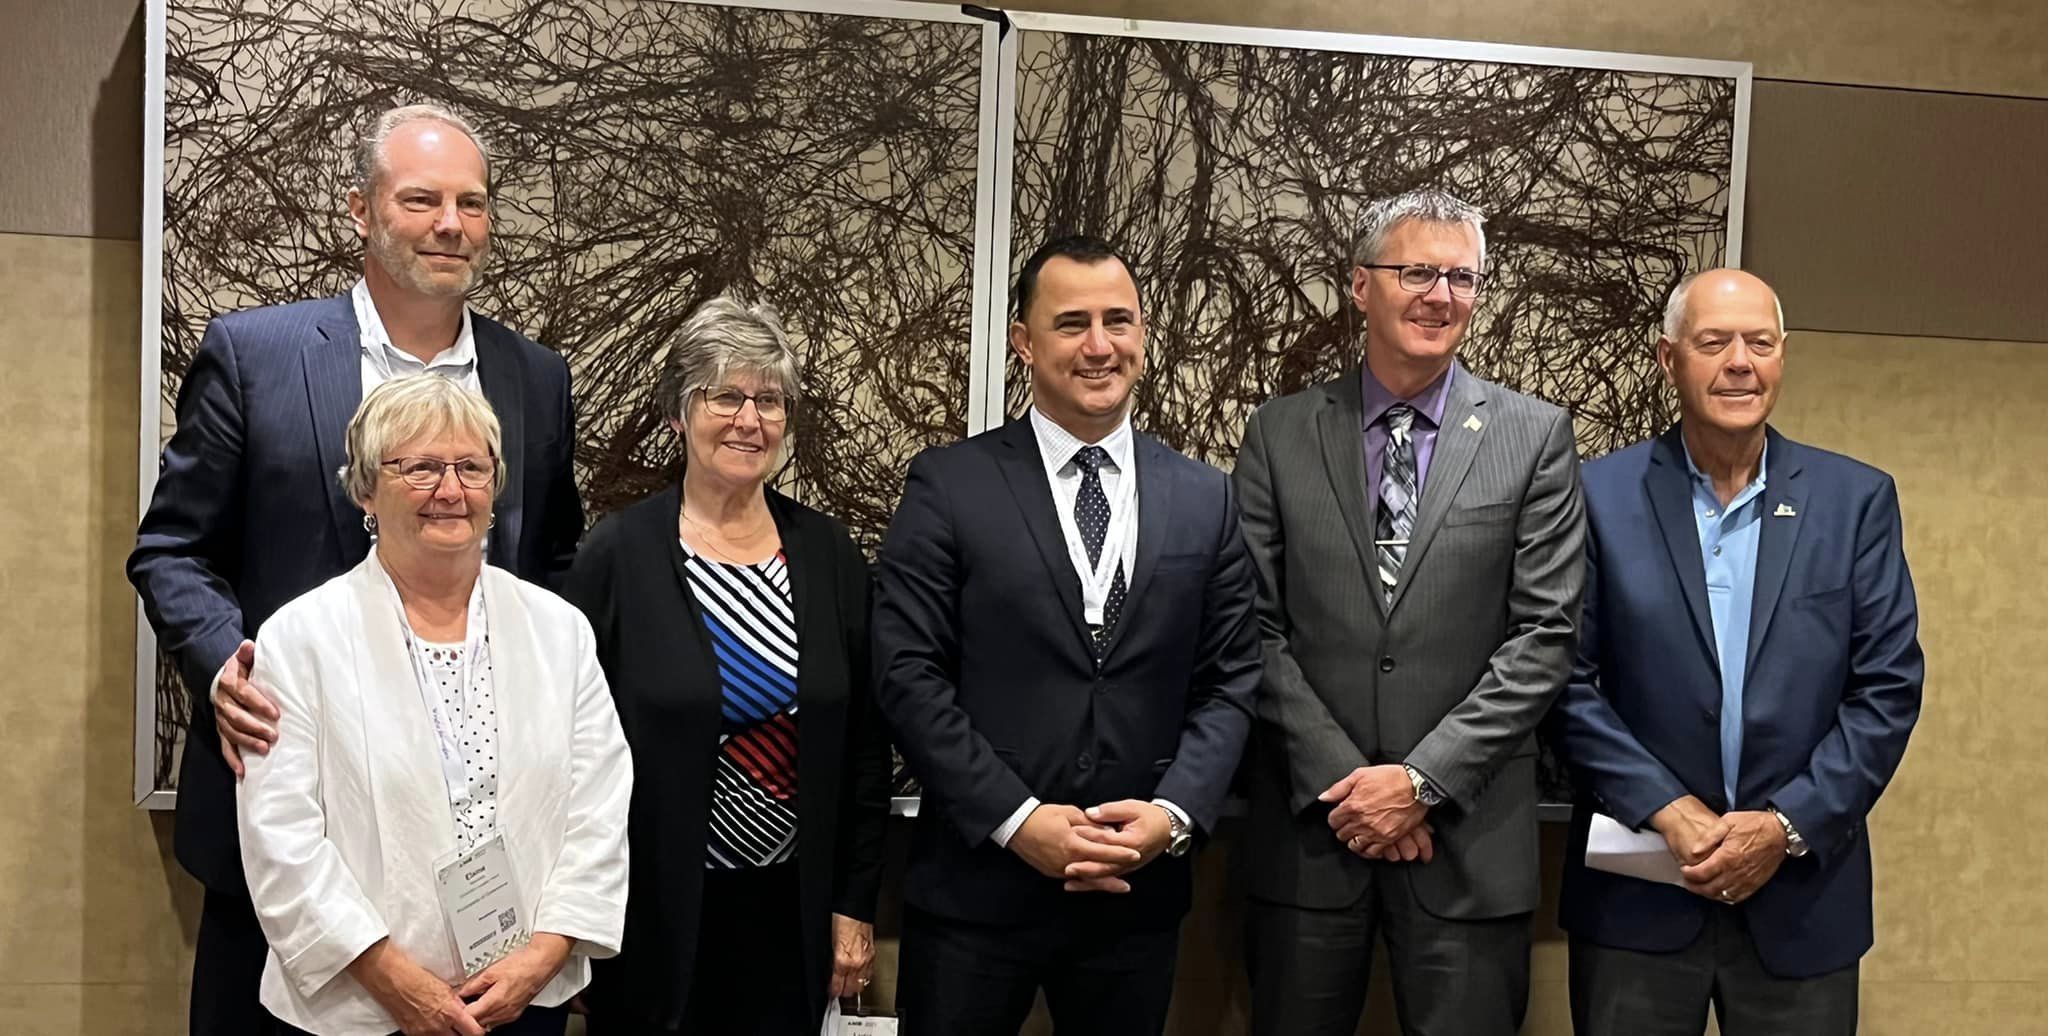 Image of a group photo at the AMO convention featuring MPP Holland, members from various municipalities, and Minister of Children, Community and Social Services, Michael Parsa. The photo captures a moment of collaboration and shared commitment to enhancing community services and social initiatives.